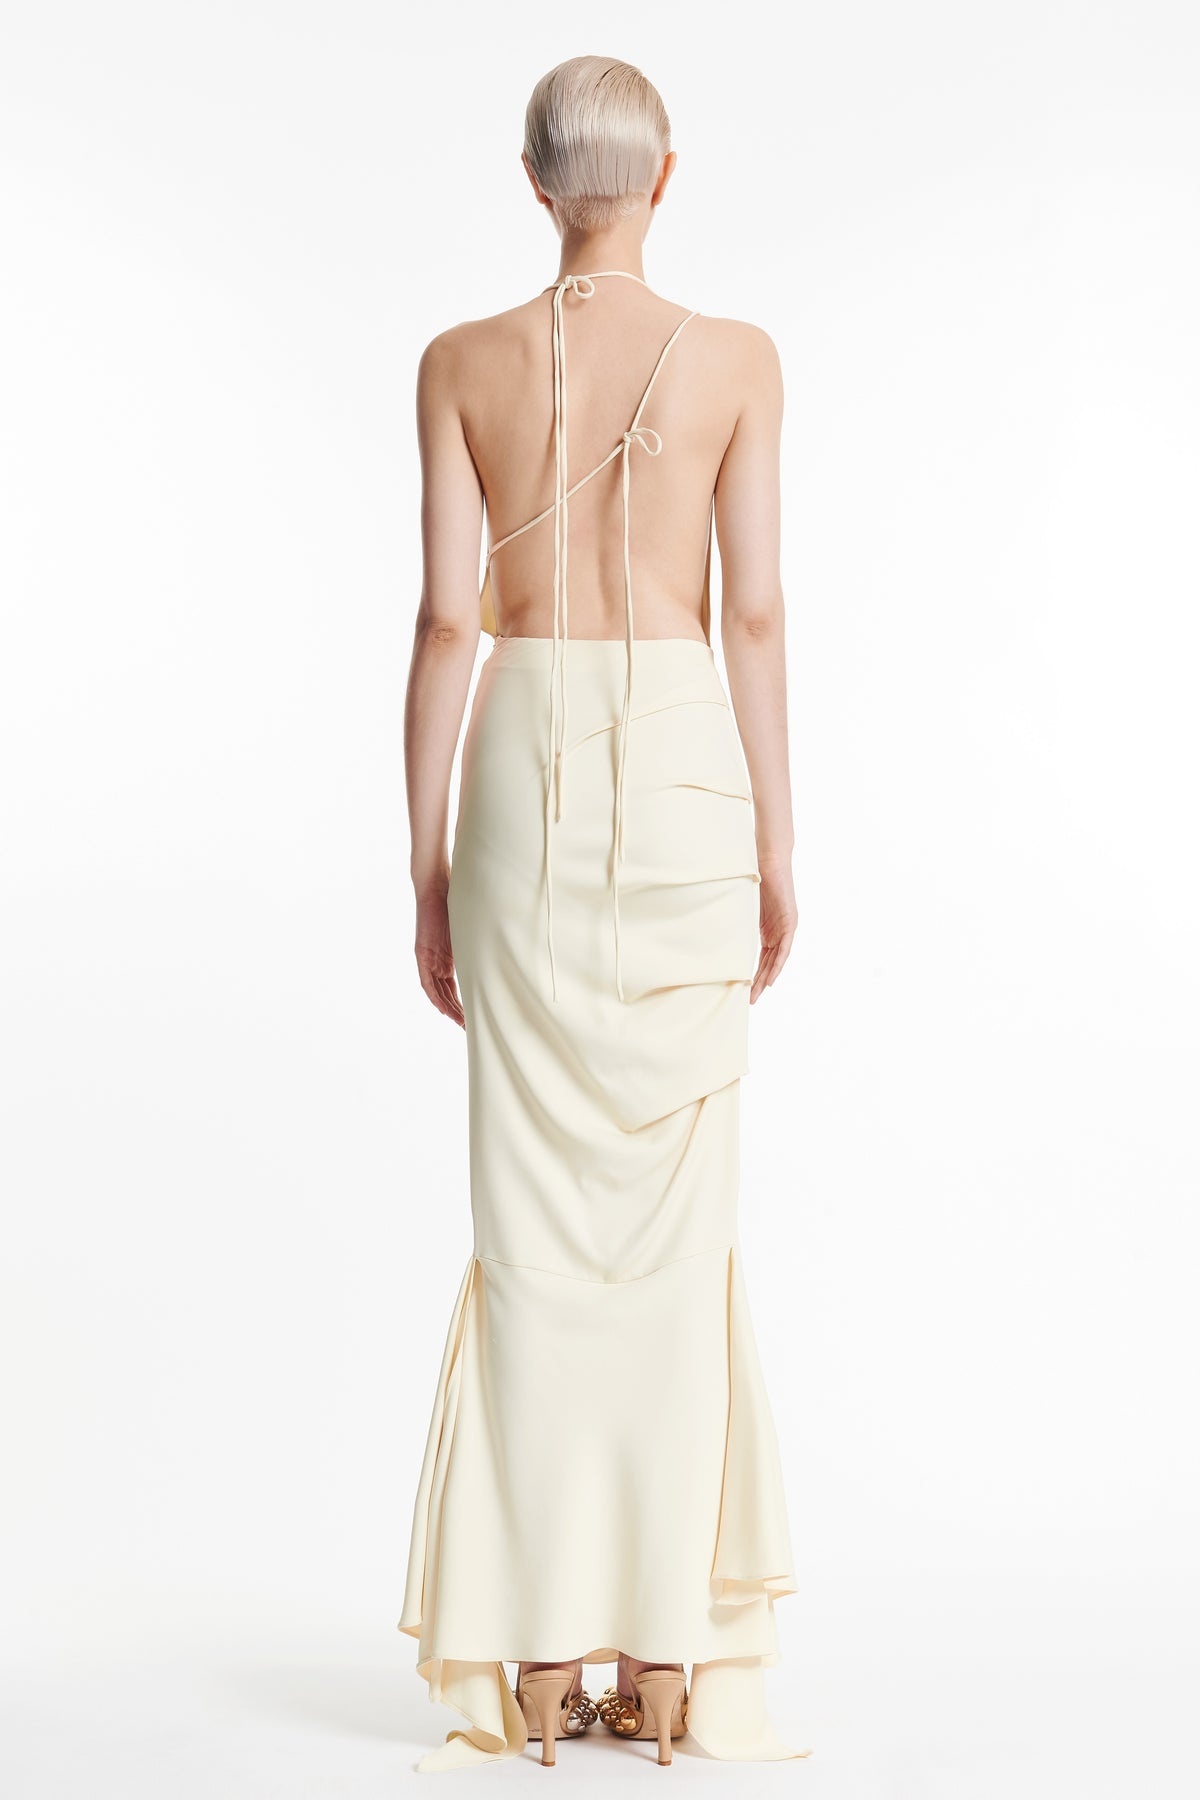 FITTED ASYMMETRIC DRAPED DRESS IVORY - 4